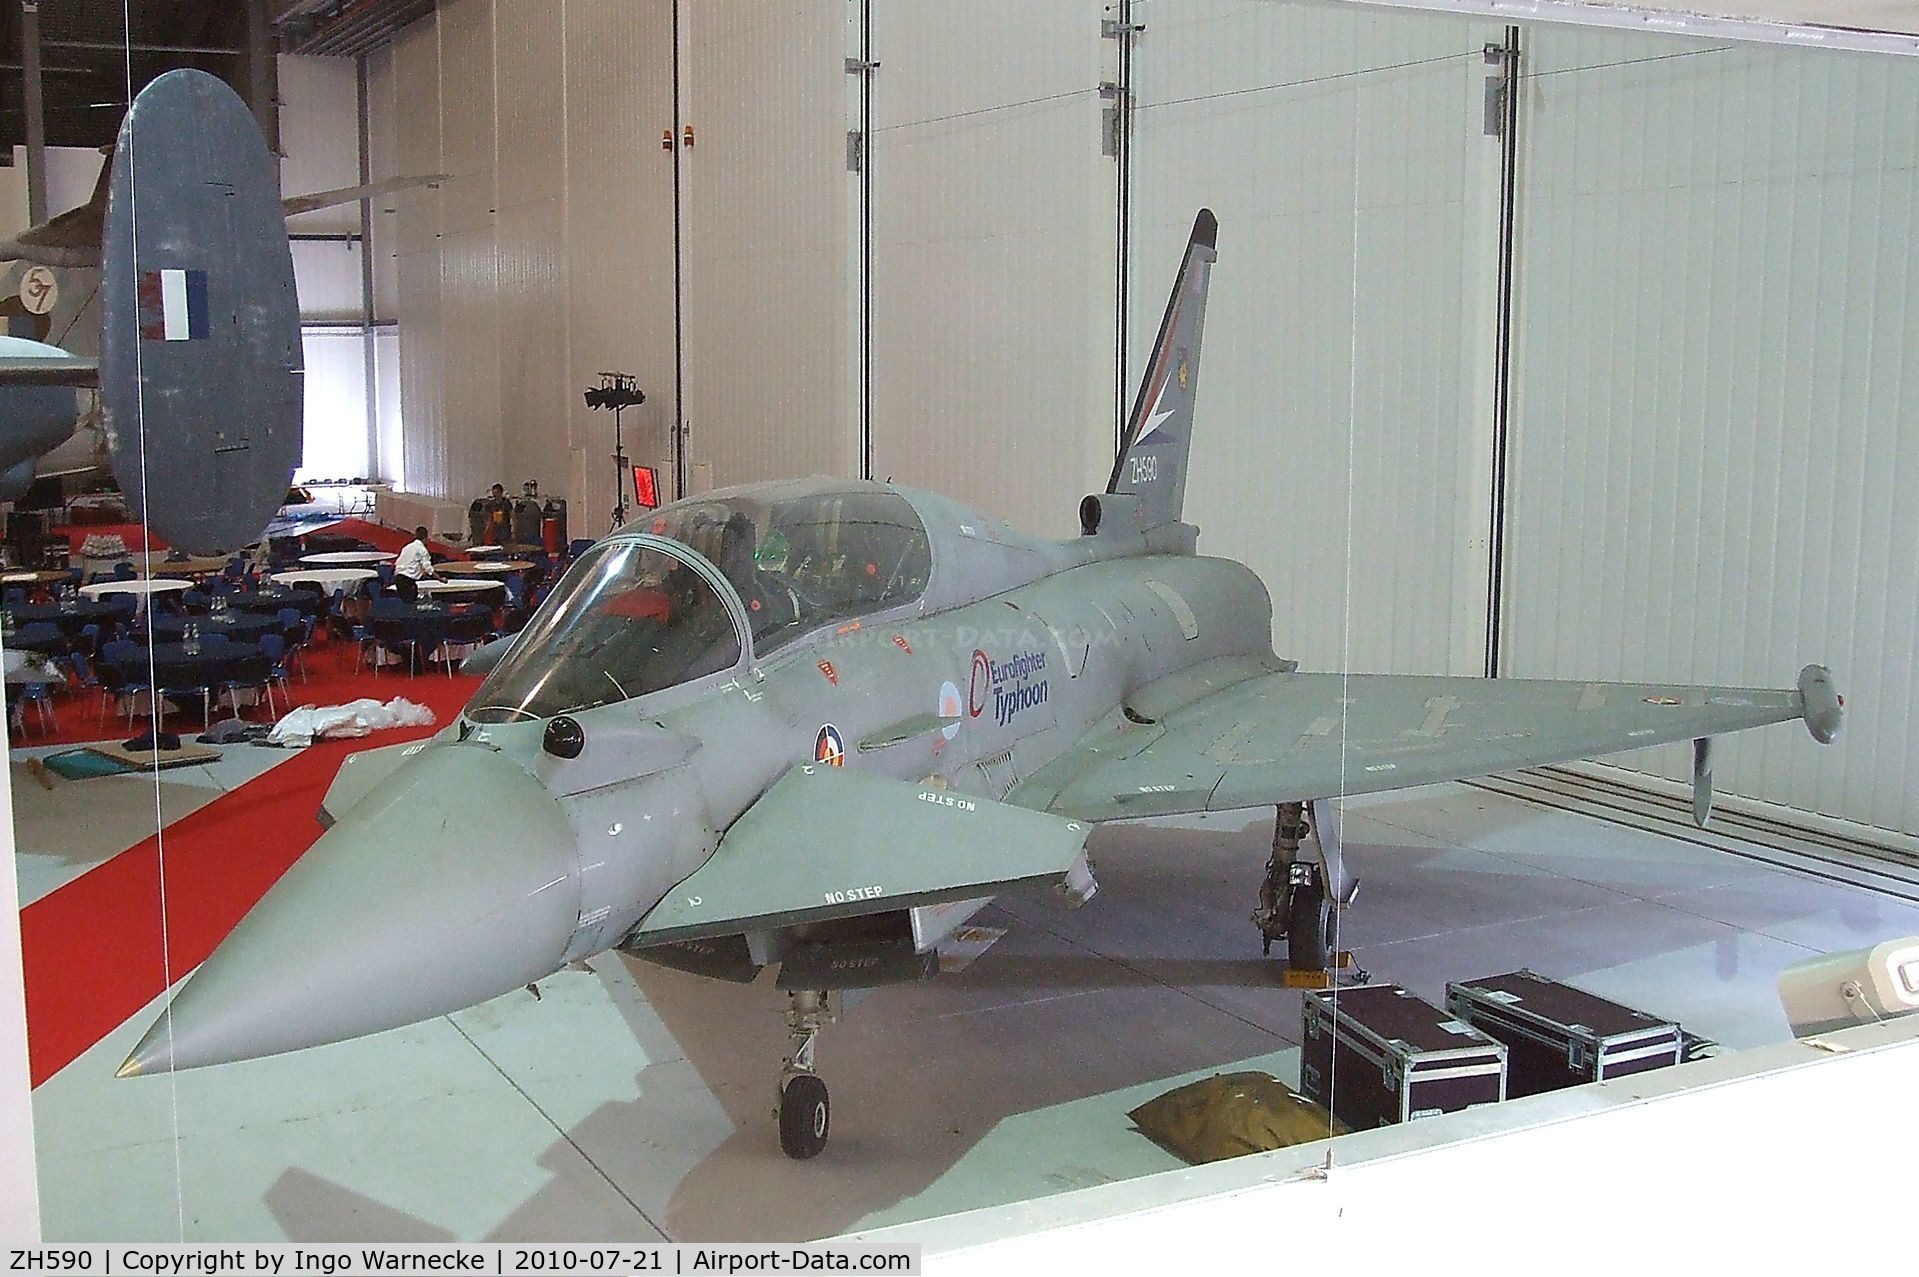 ZH590, 1997 Eurofighter EF-2000 Typhoon T1 C/N DA4, Eurofighter EF2000 Typhoon T1 at the Imperial War Museum, Duxford